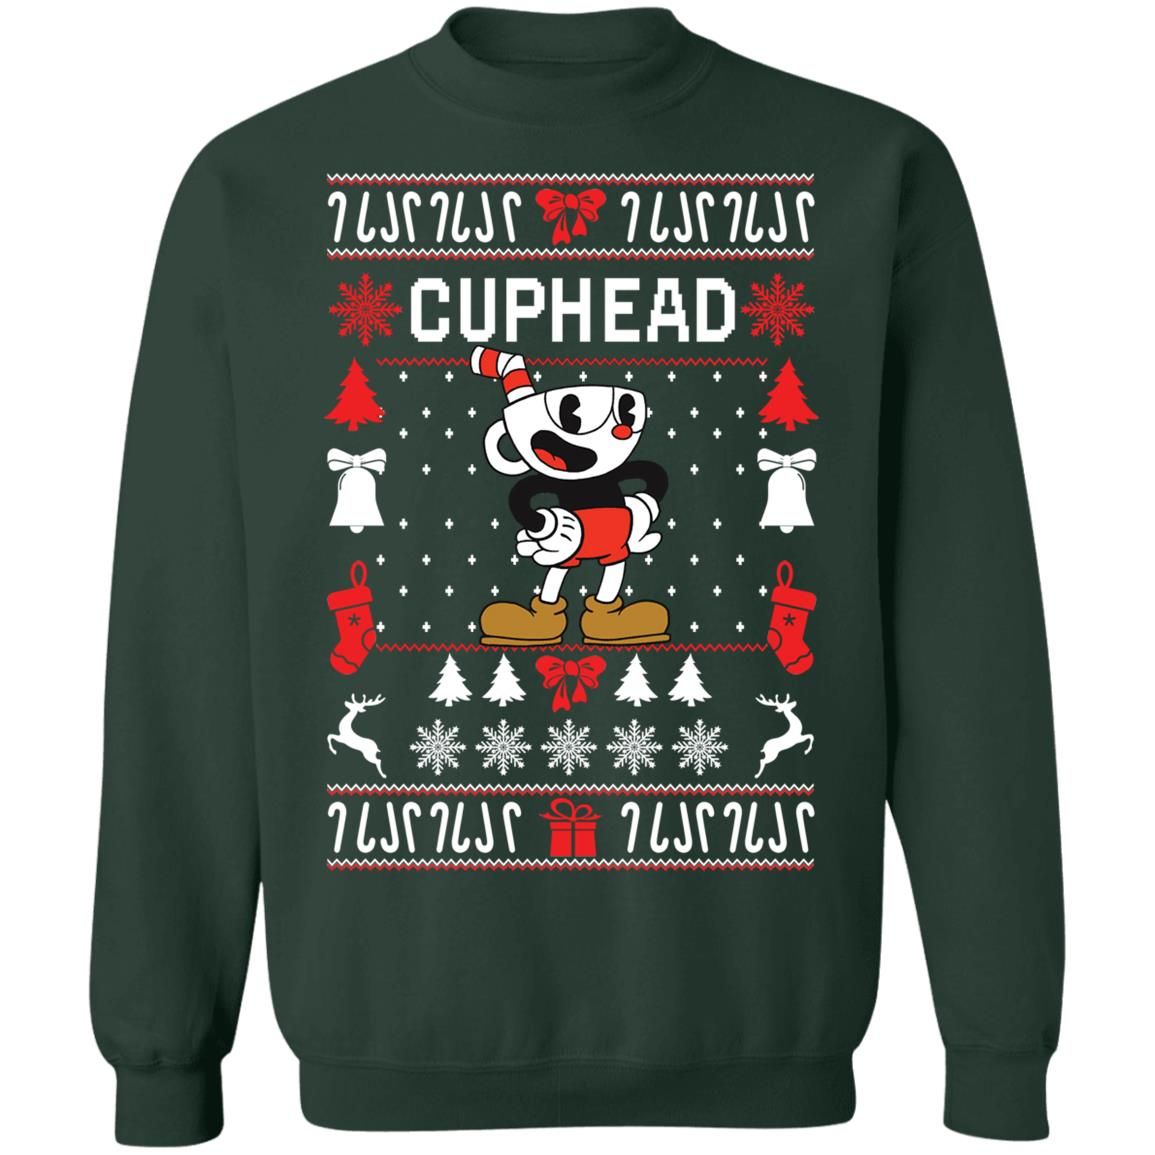 Cuphead Christmas sweater Cuphead cute with bells and stocking Sweatshirt Forest Green S